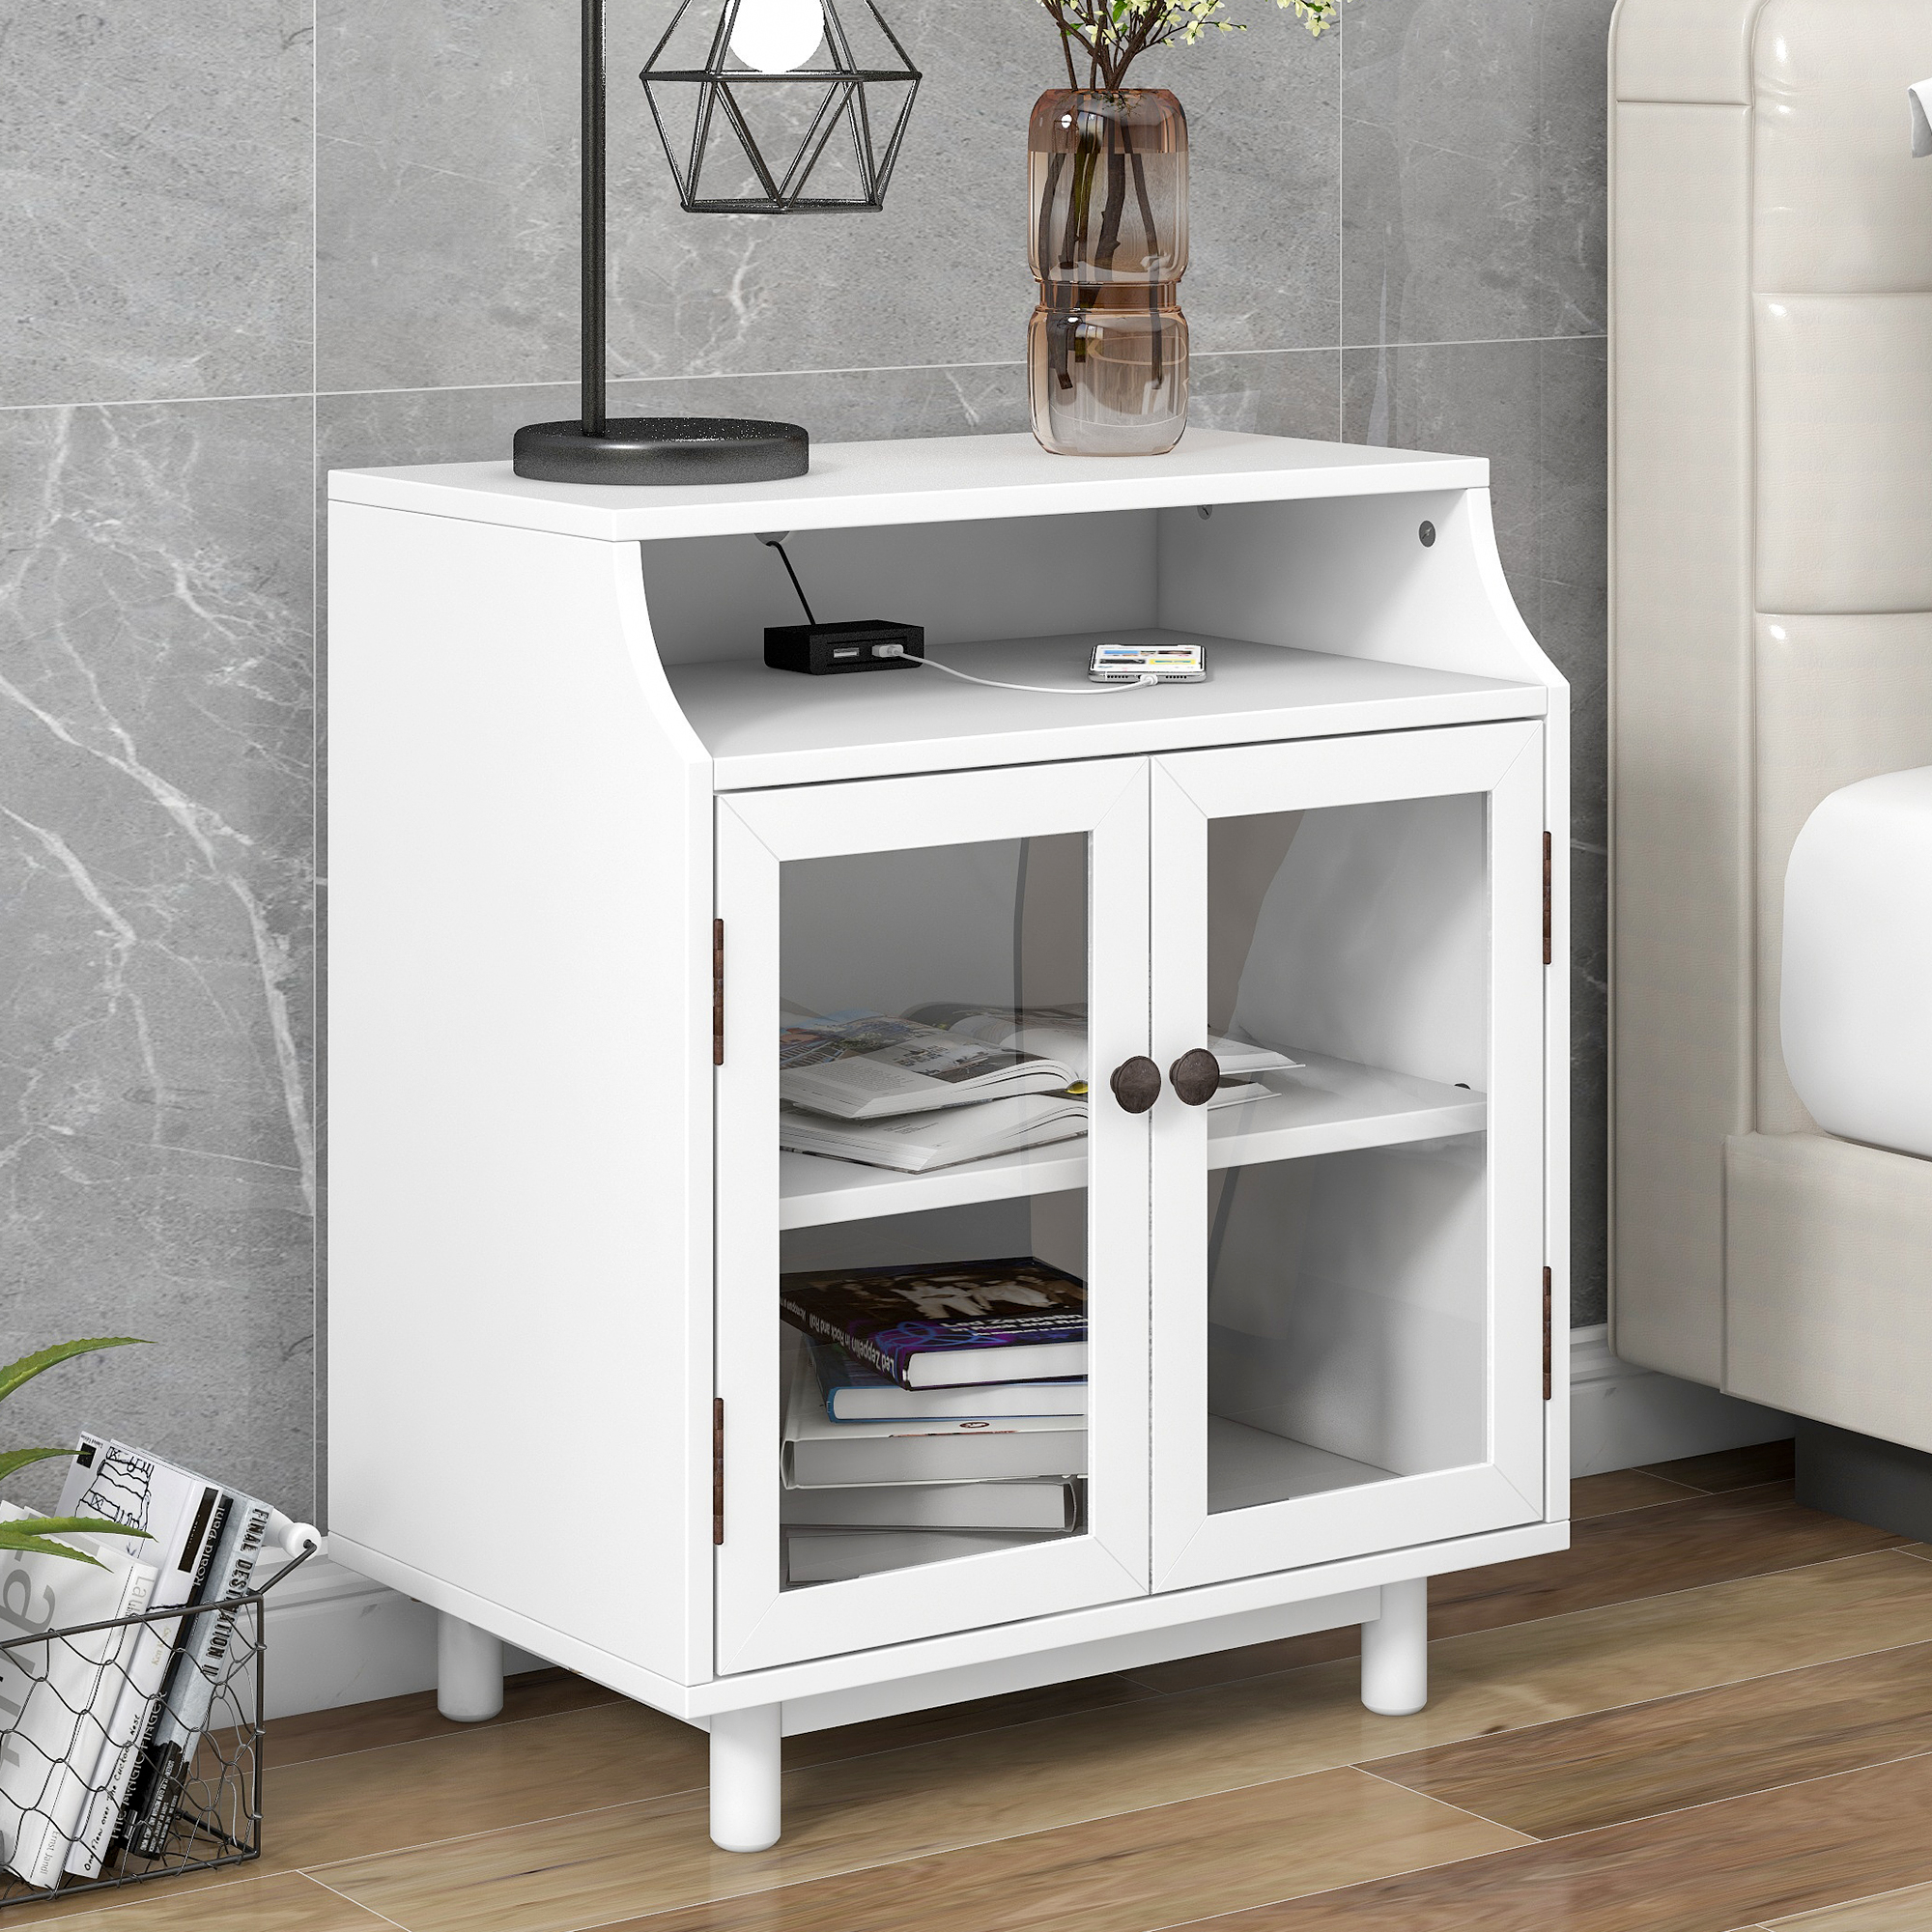 Nightstand With Storage Shelves And Cabinets - WF290892AAK